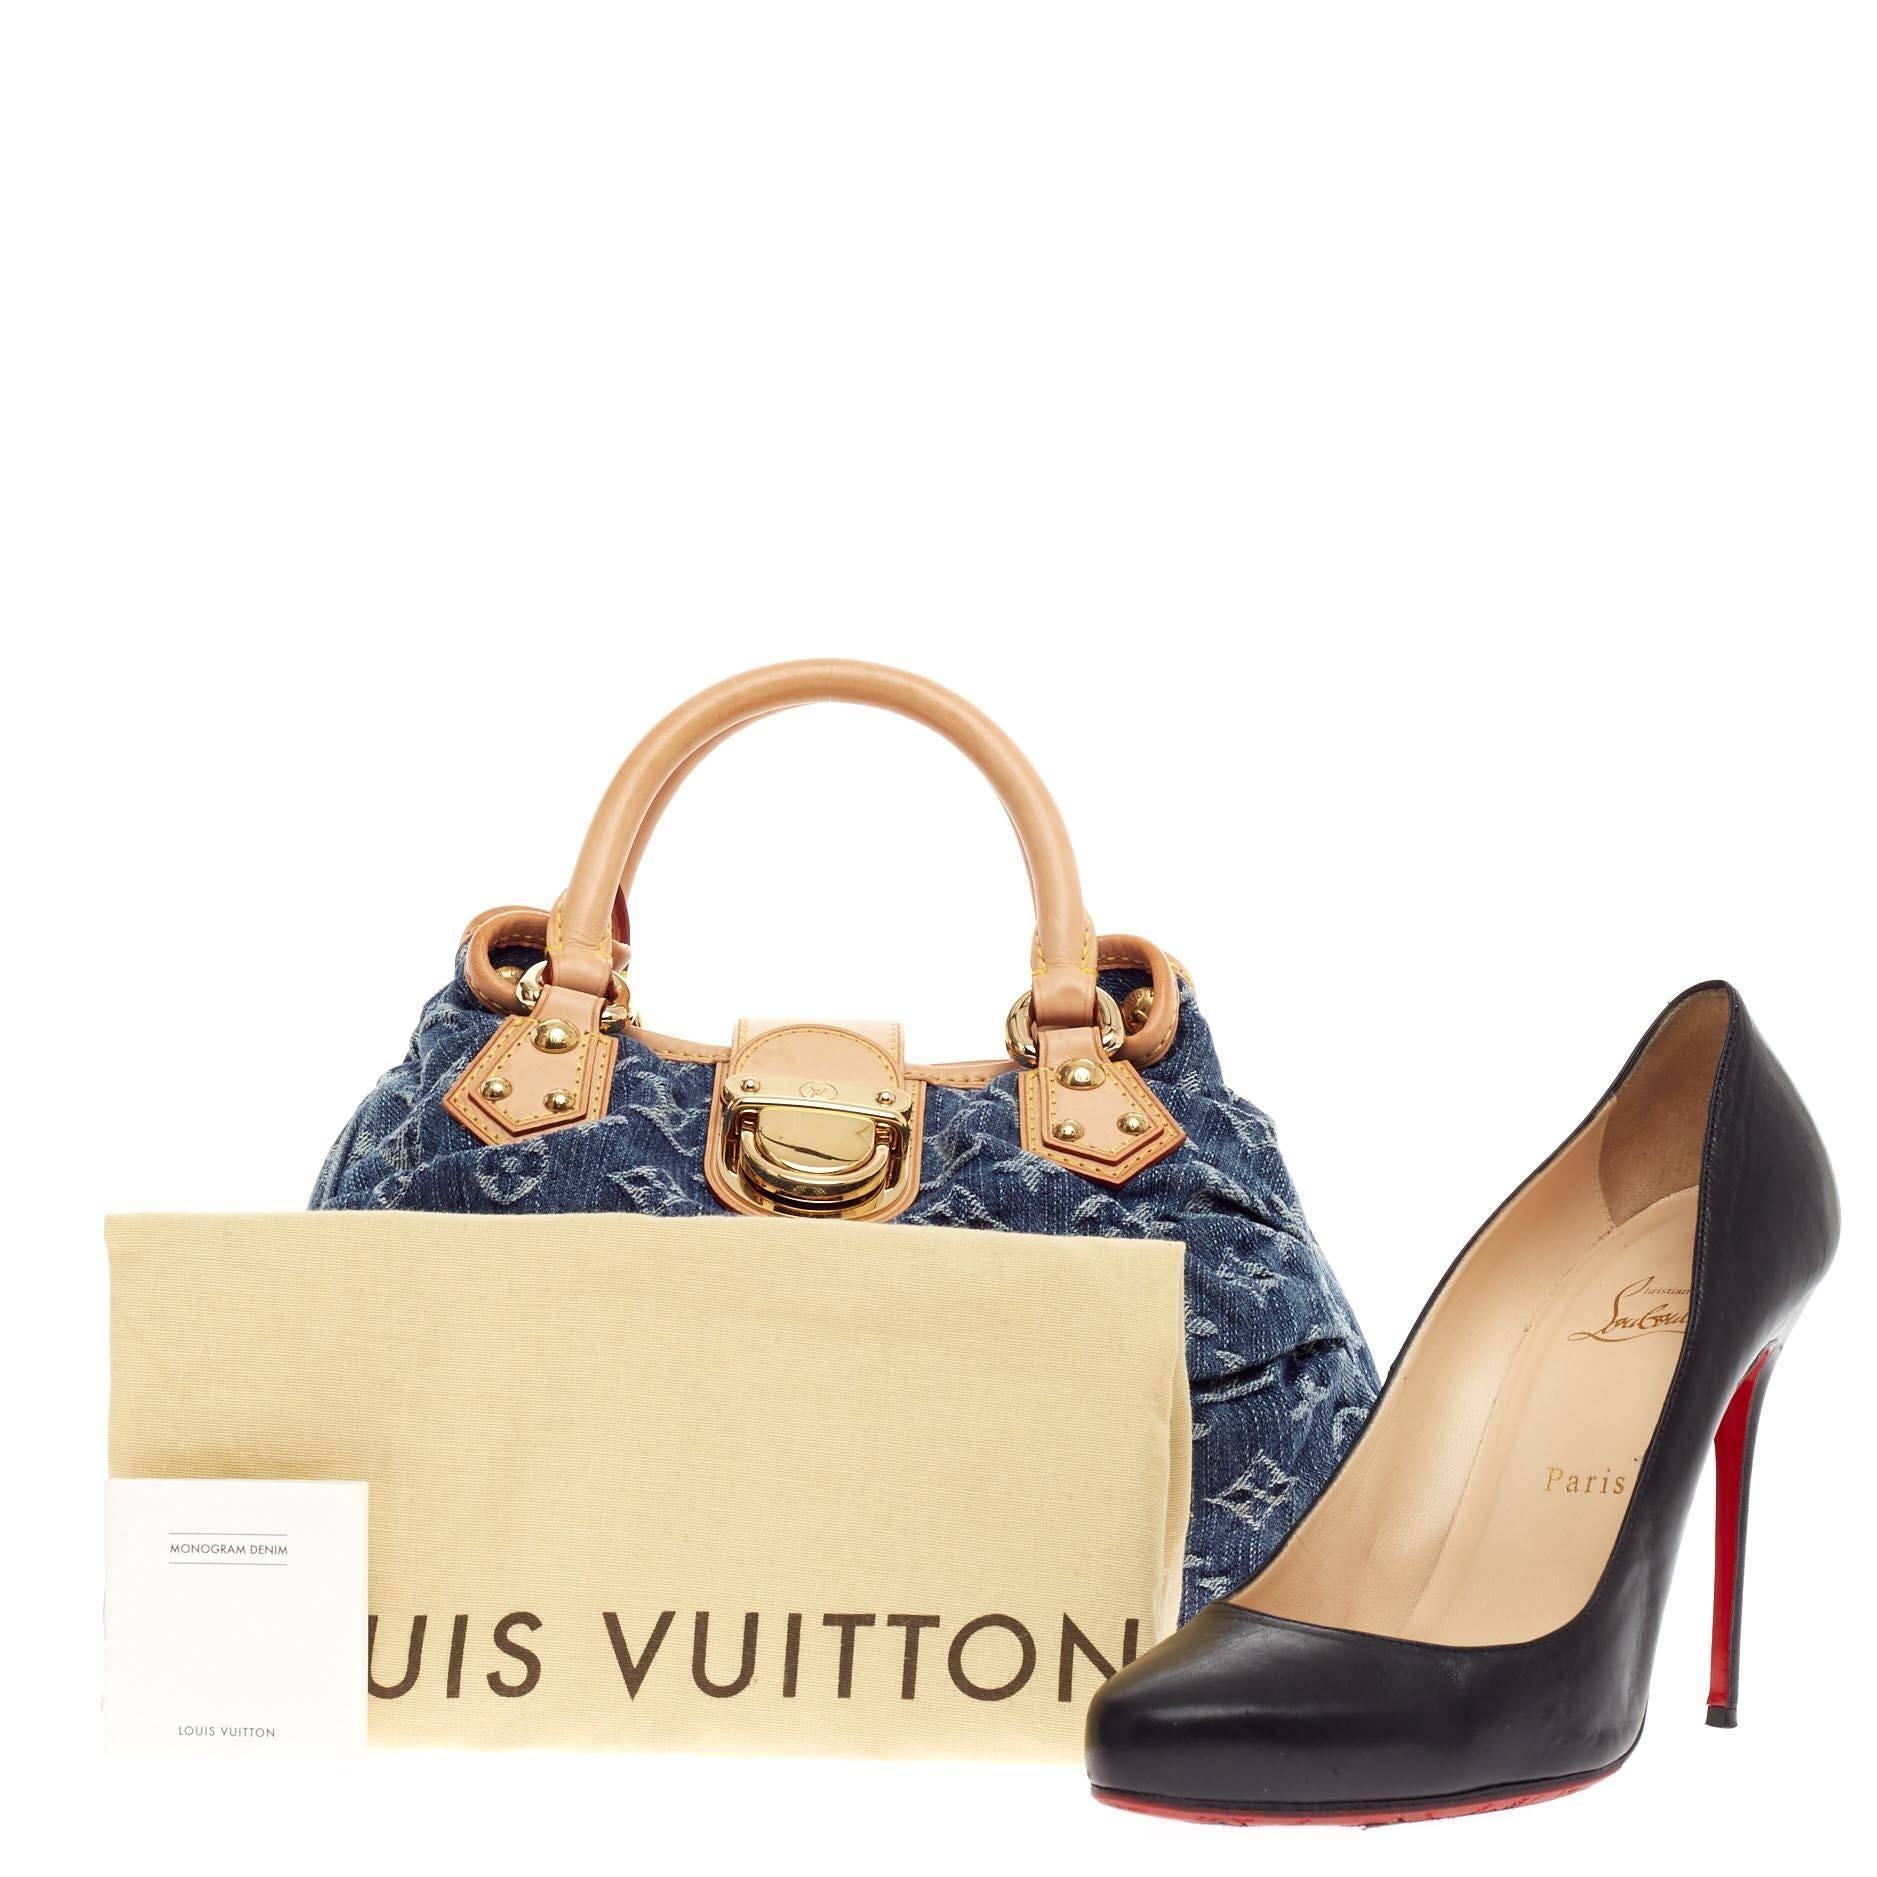 This authentic Louis Vuitton Pleaty Denim Small showcases a fun twist to the classic monogram design. Crafted from stonewashed blue monogram denim, this small hobo features dual-rolled vachetta leather handles, vachetta leather trims with yellow